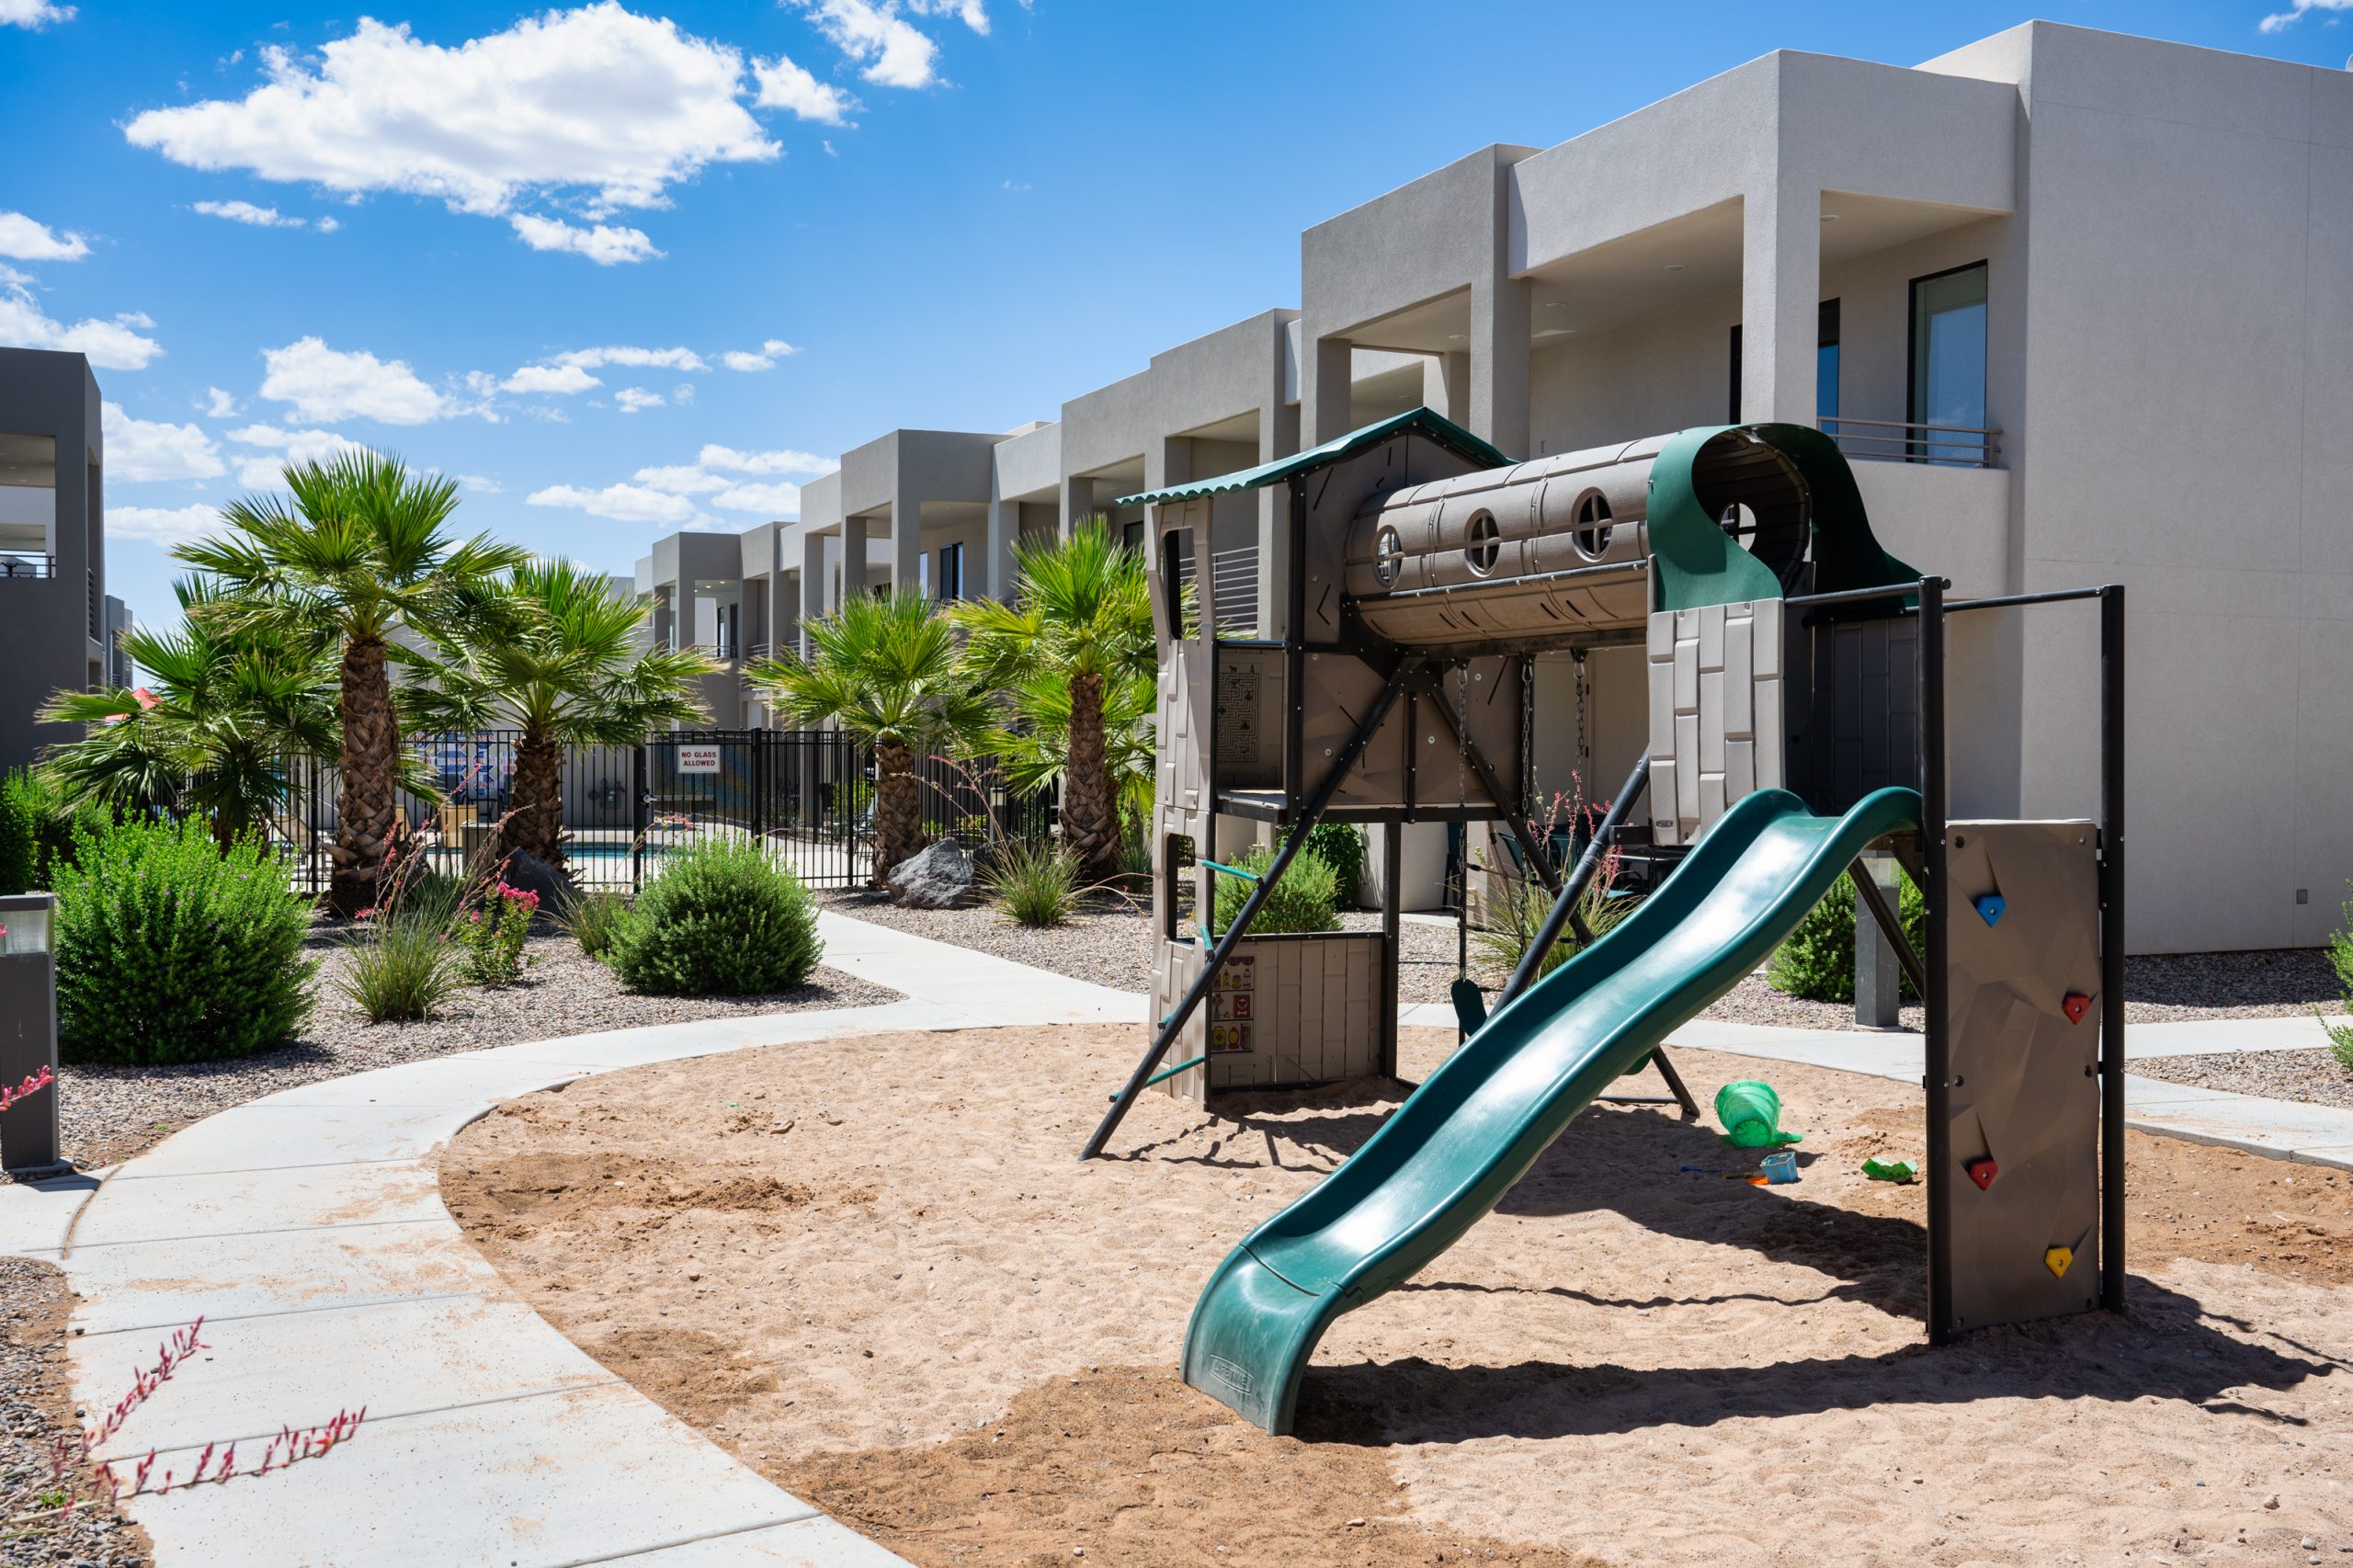 The Lofts at Green Valley playground